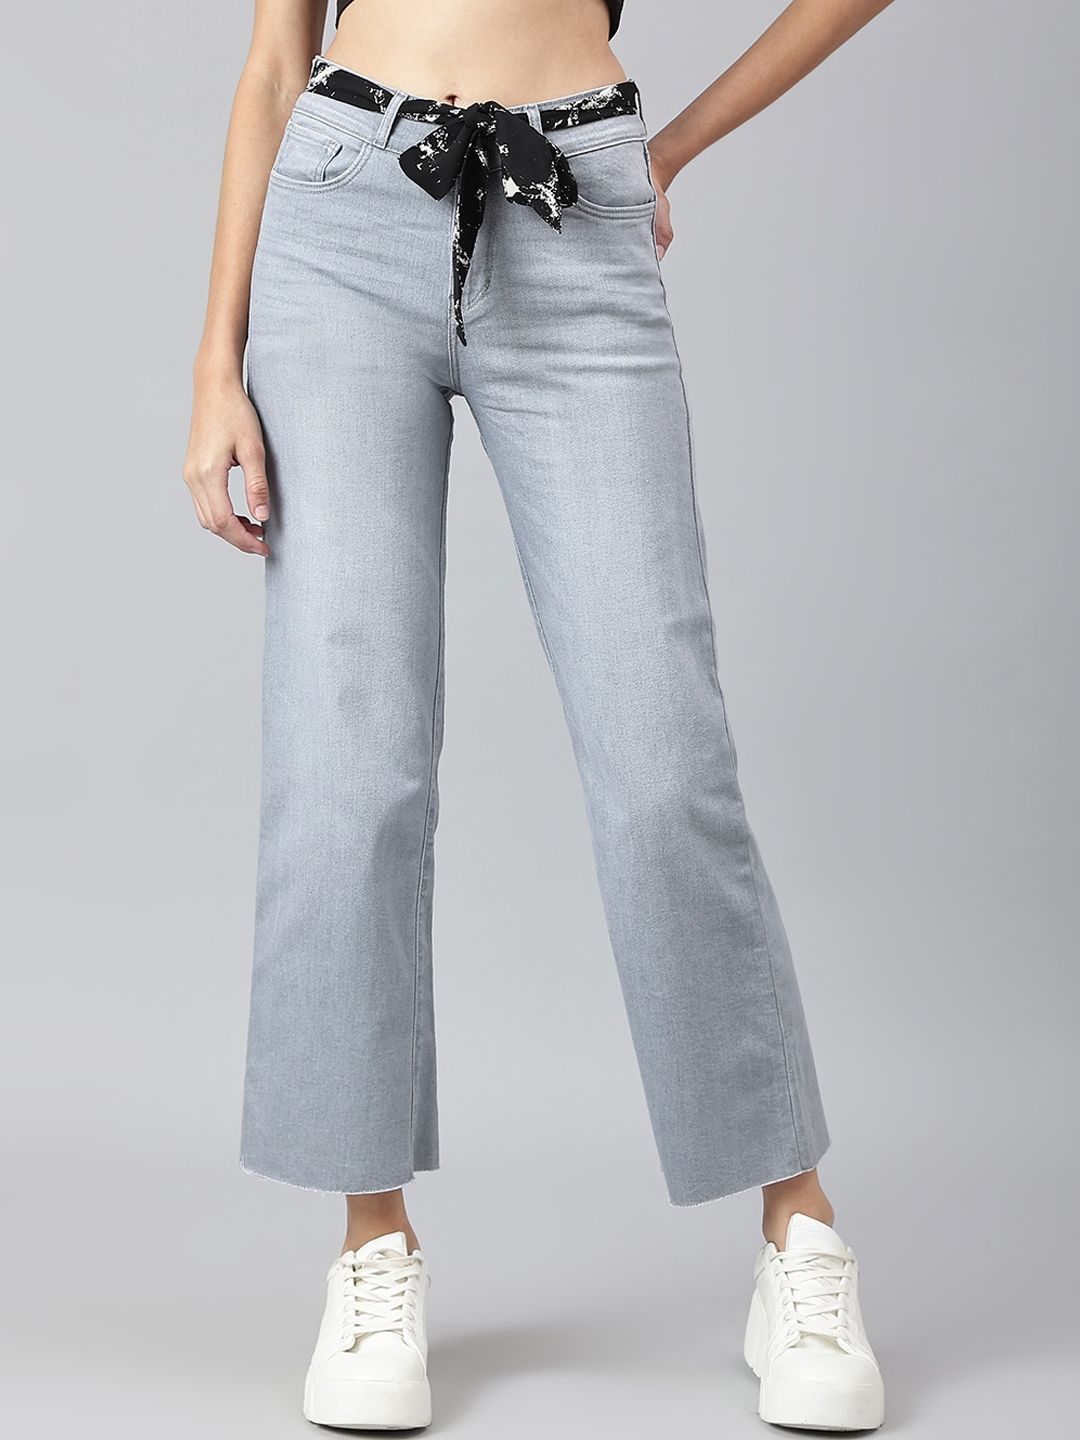 Xpose Women Grey Comfort Wide Leg High-Rise Stretchable Jeans With Satin Belt Price in India